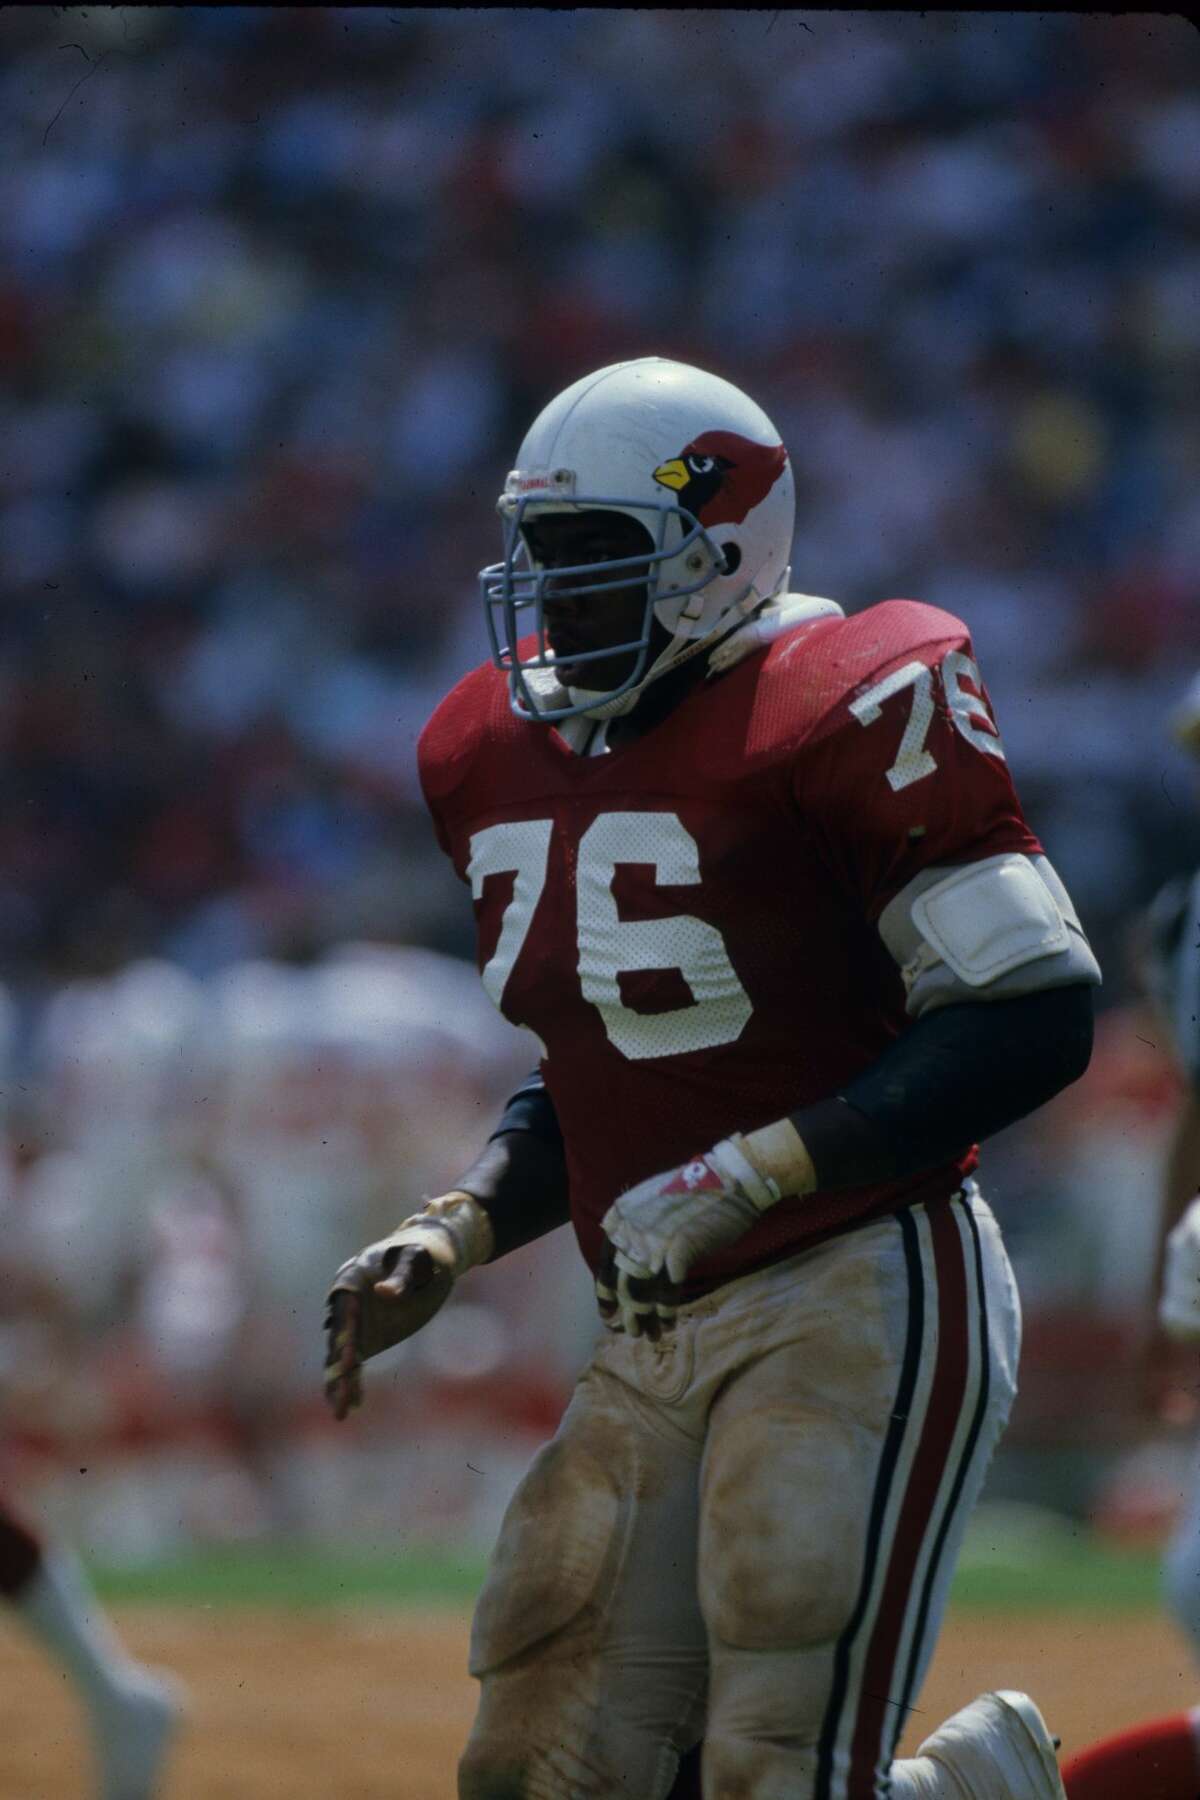 Mays was a defensive tackle in the NFL from 1980 to 1988 for Minnesota Vikings -- which had Pete Carroll as a secondary coach at the time — and the St. Louis Cardinals, now the Arizona Cardinals. He has a son who played for a couple of years in the NFL and CFL. Mays was a salesman, later-turned executive at Microsoft after his NFL days.